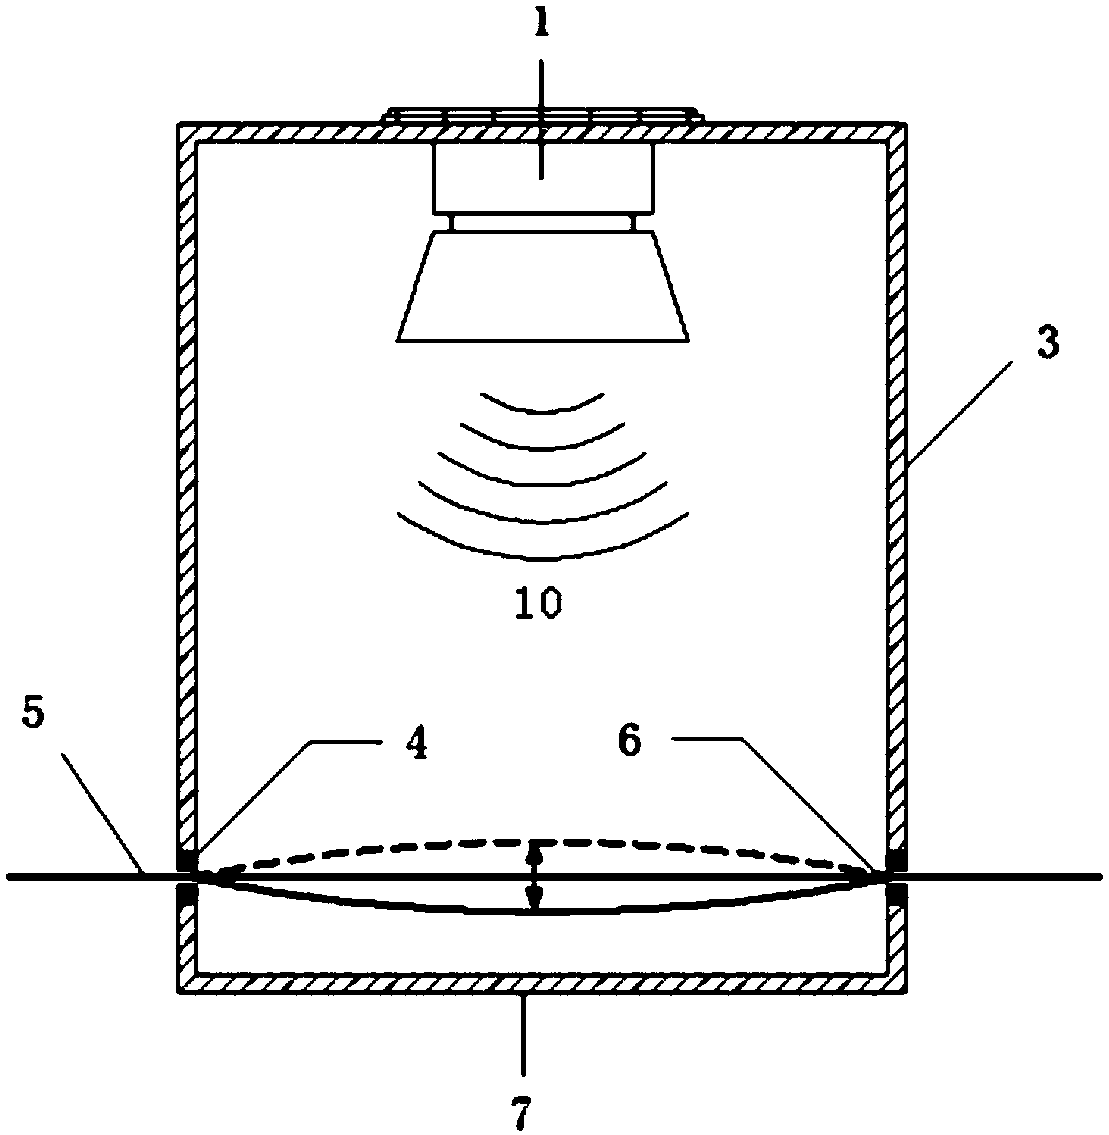 Membrane tension test method and device based on thin membrane resonance